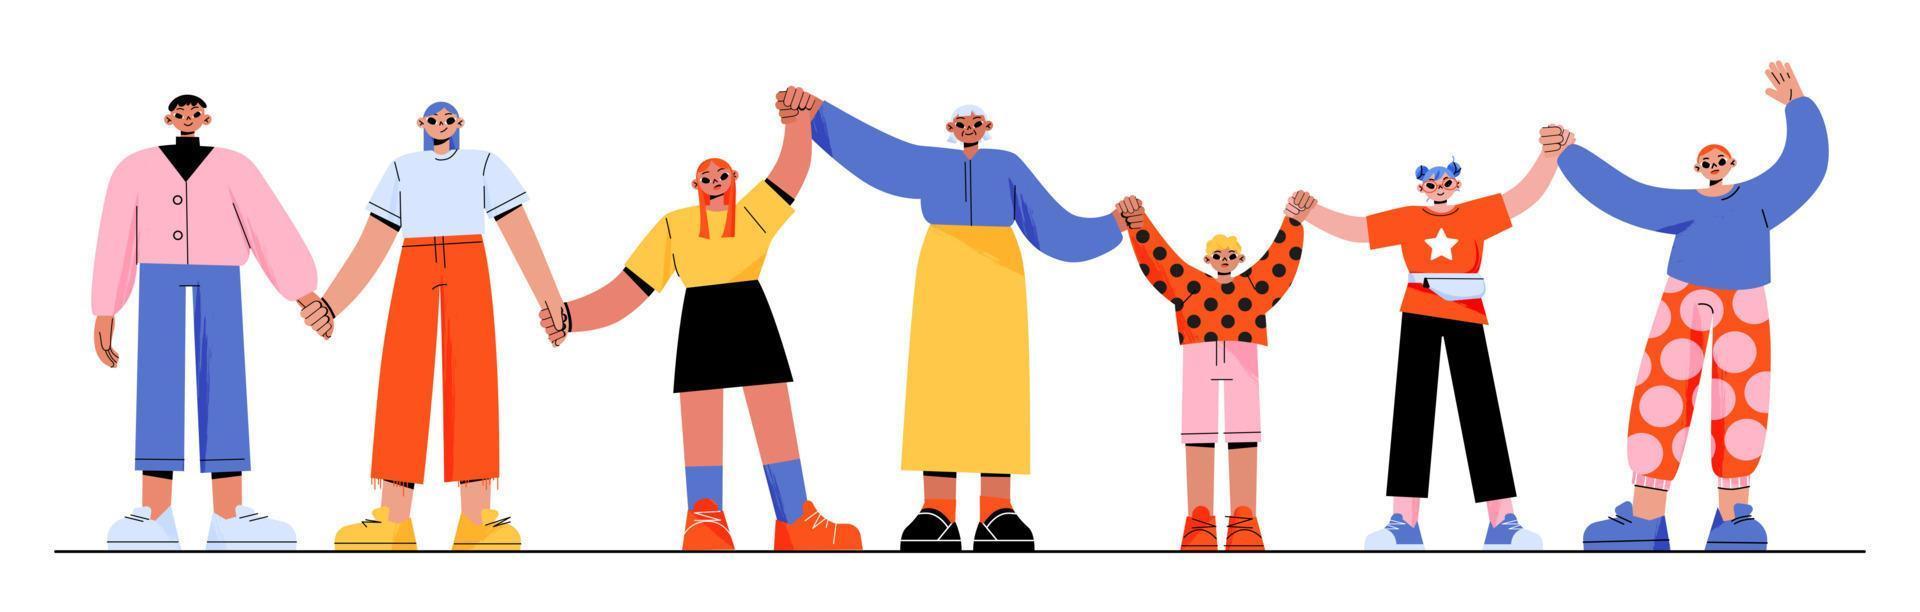 Happy people holding hands stand all together vector